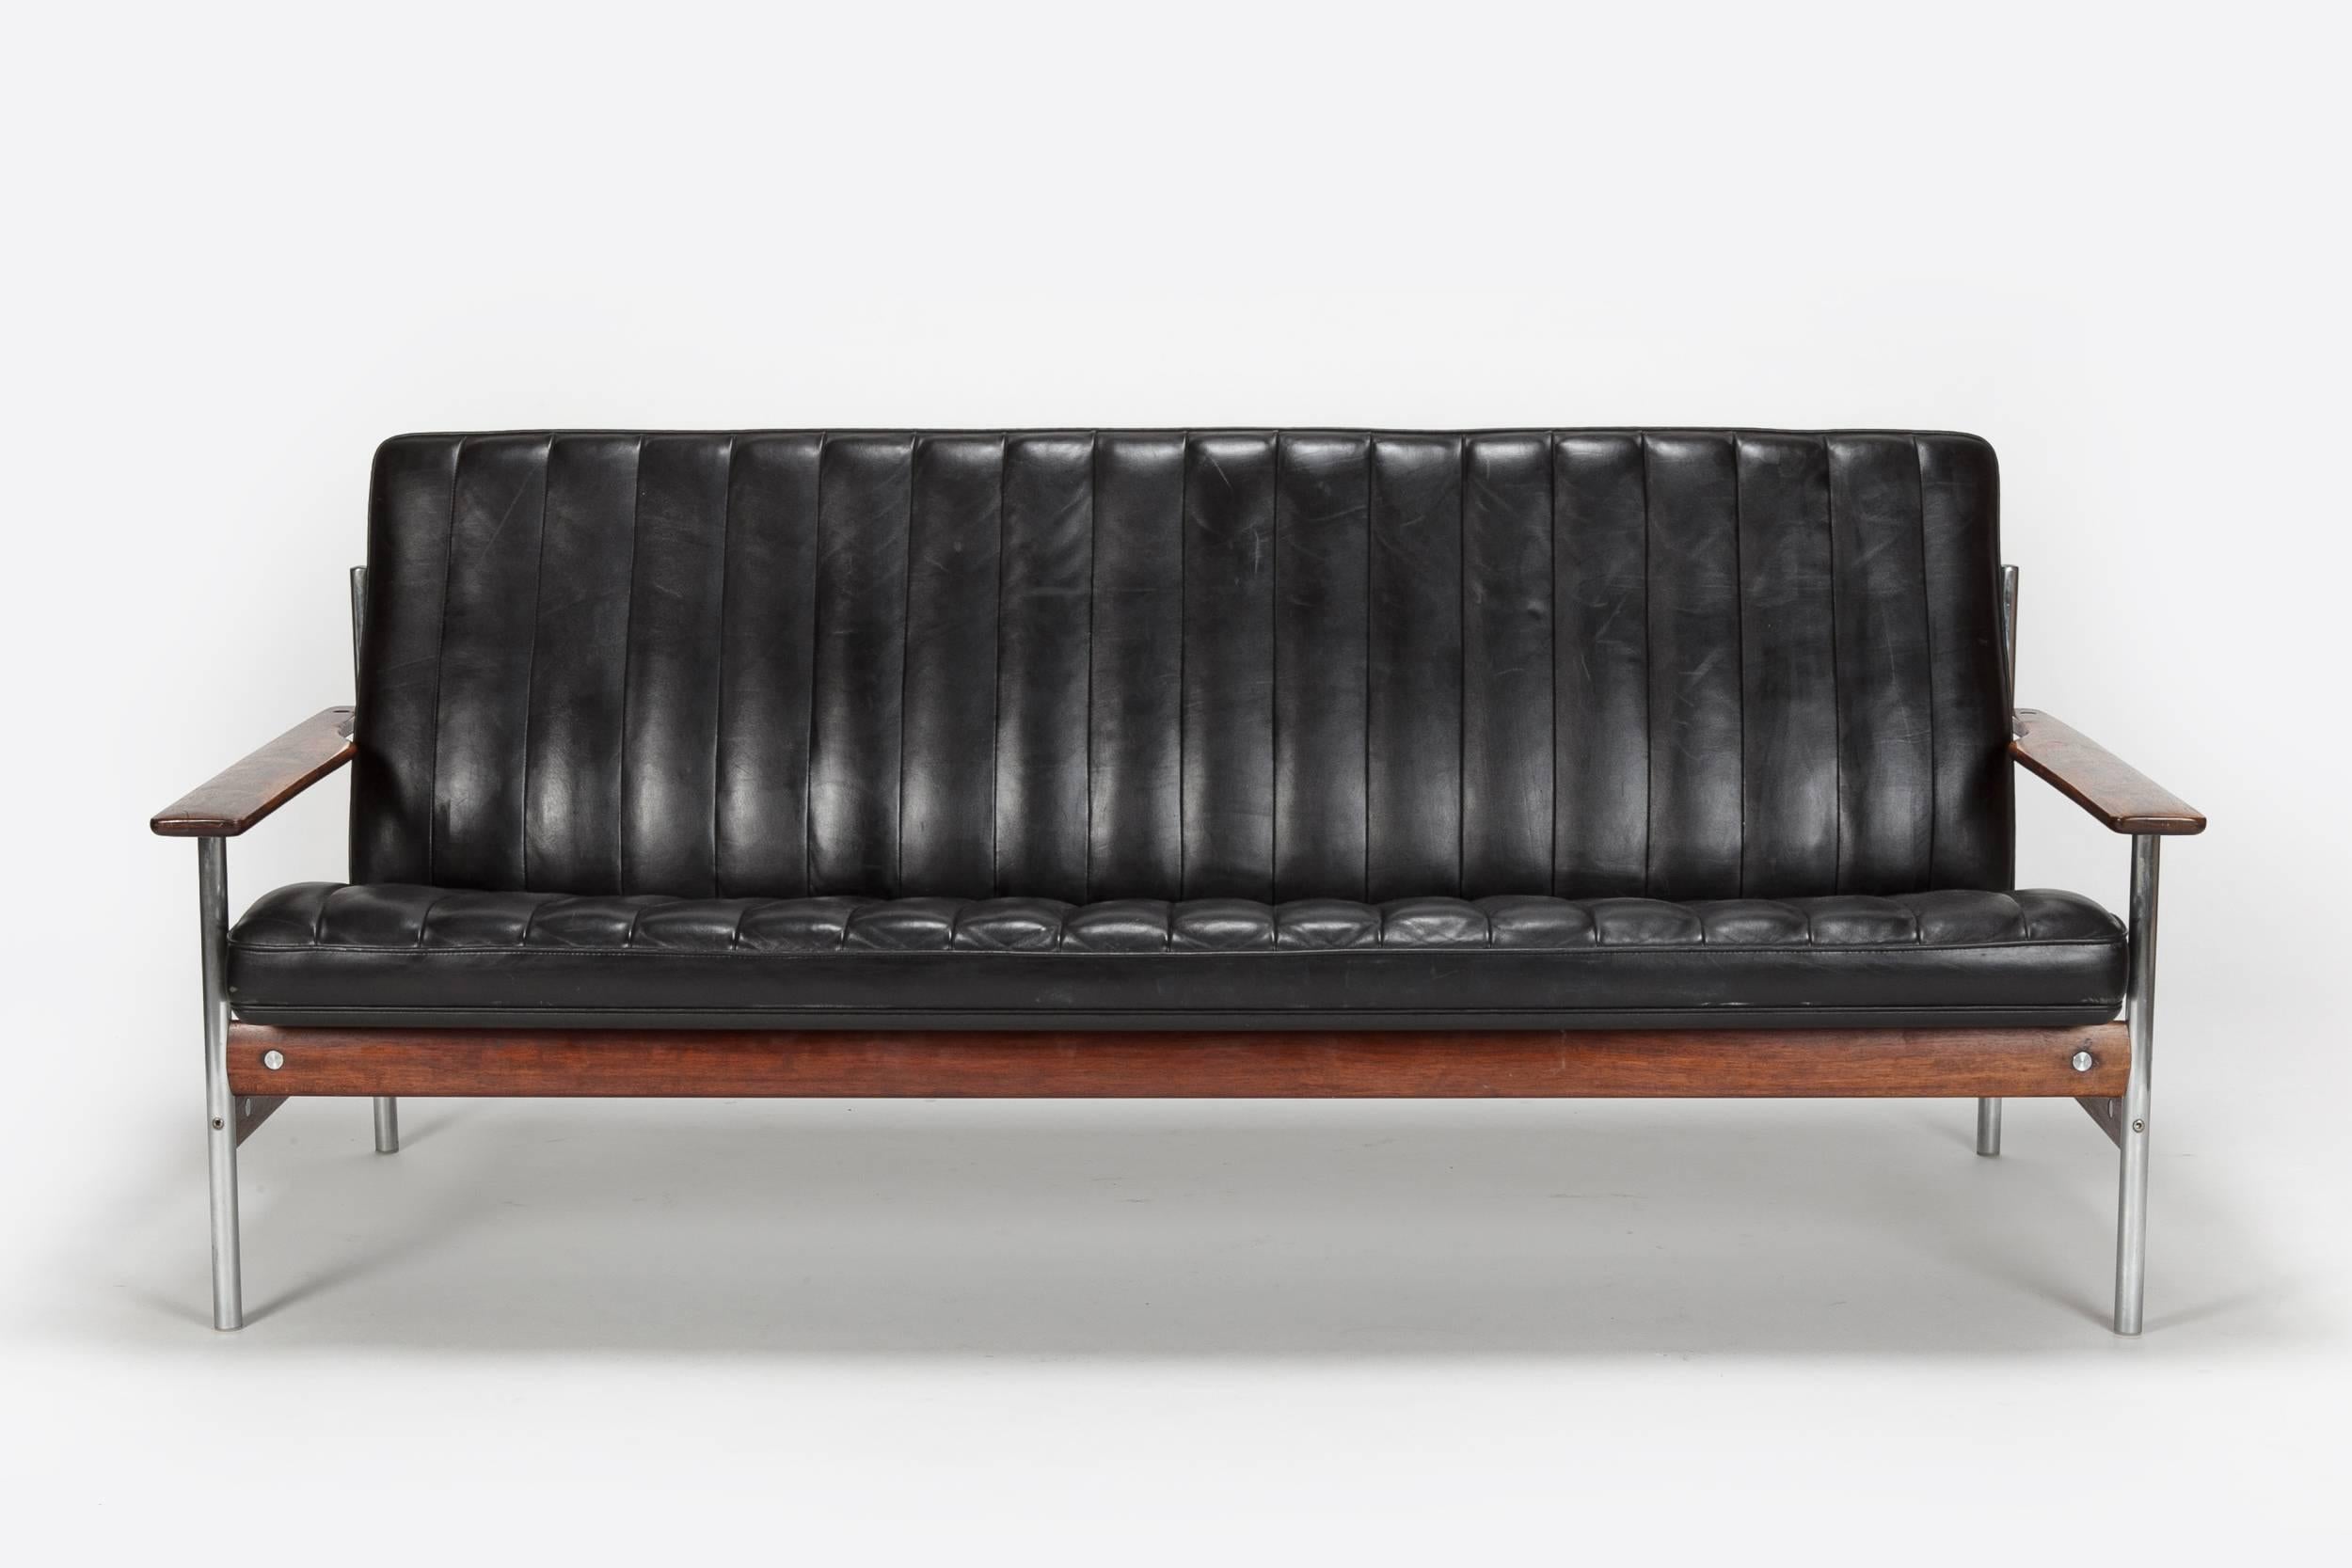 Stunning and very rare Sven Ivar Dysthe sofa from the 1959 designed “1001” series for Dokka Møbler in Norway. The frame is made of steel combined with beautiful grained solid rosewood, original black leather upholstery. All parts are of a distinctly